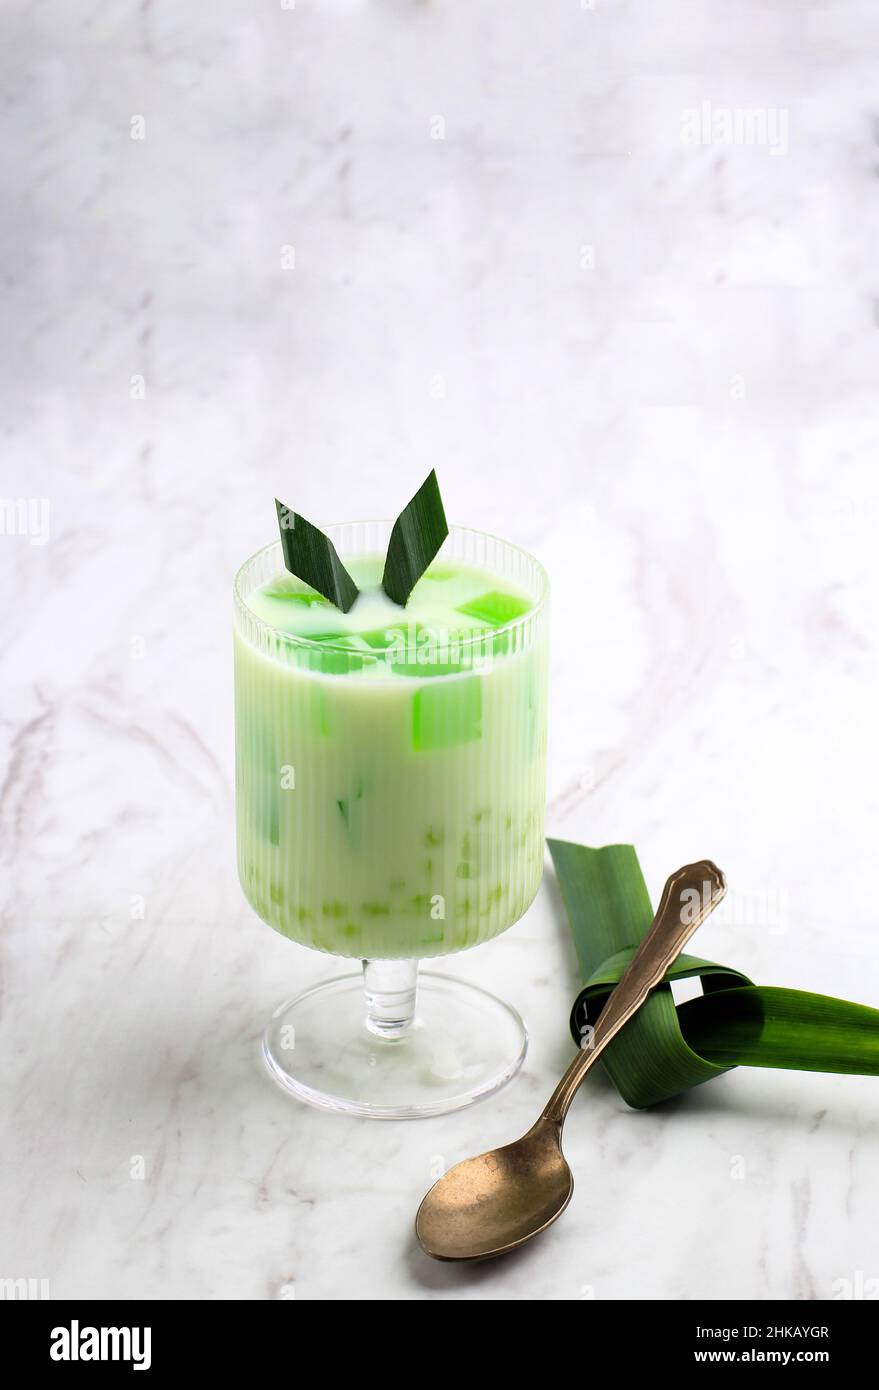 Buko Pandan,Philippines Dessert Made from Jelly, Young Coconut, Evaporated Milk, Sweetened Condensed Milk, and Ice. Served in Glass on White Marble Ba Stock Photo